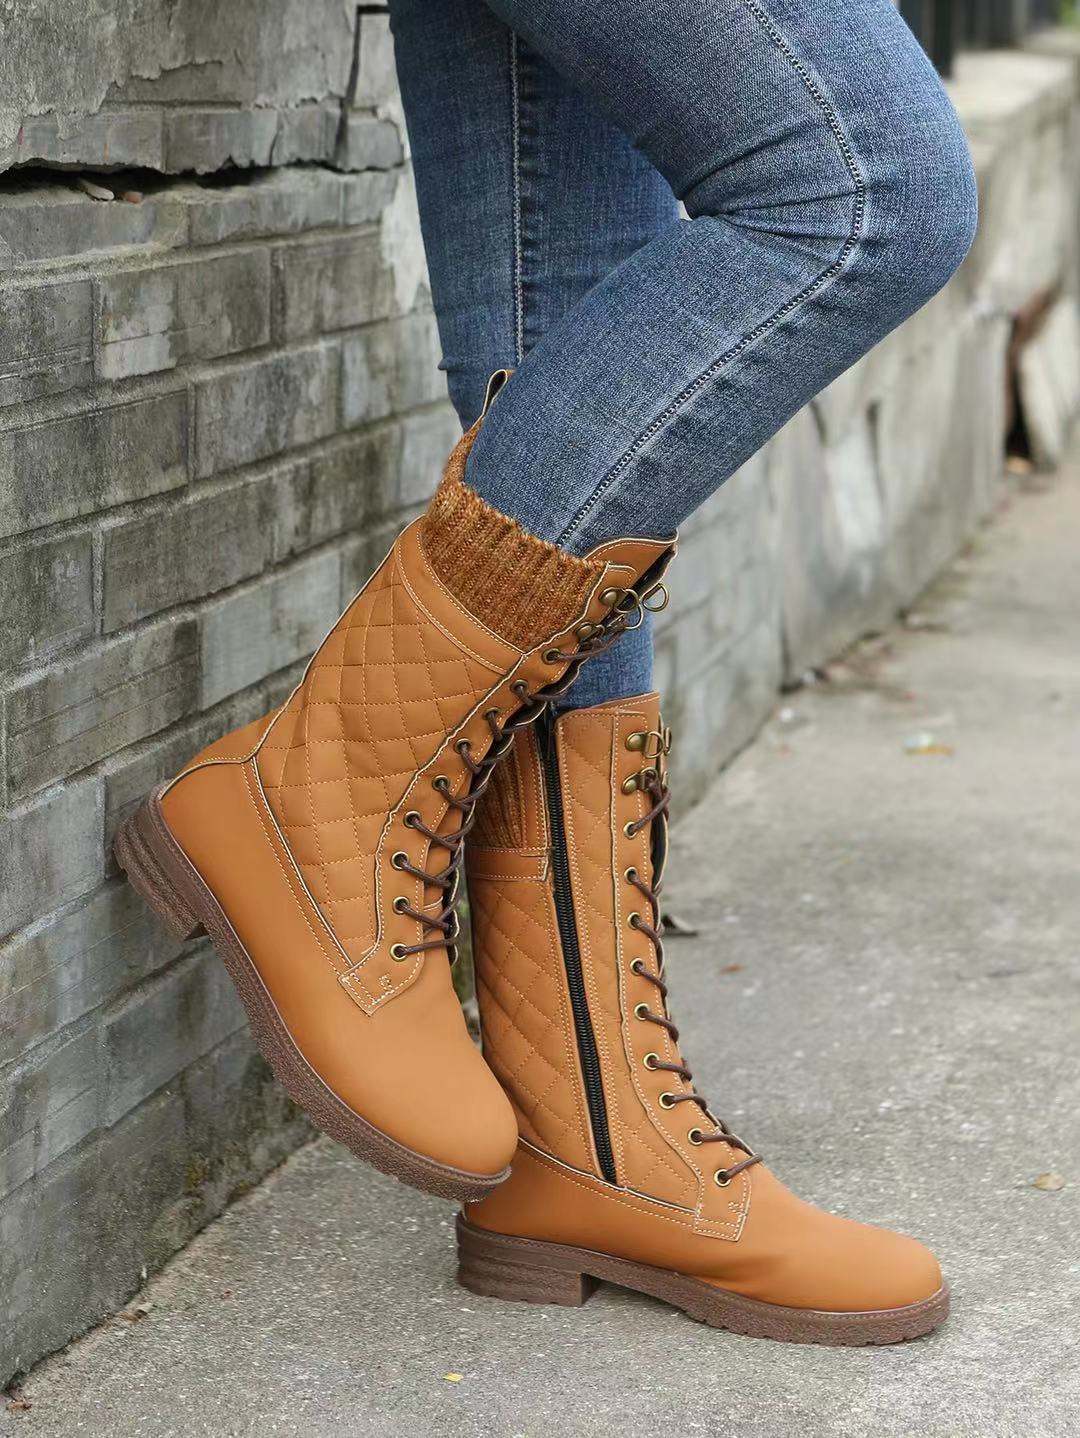 Autumn and Winter Women's Mid-Calf Flat Heel Snow Boots in Solid Color